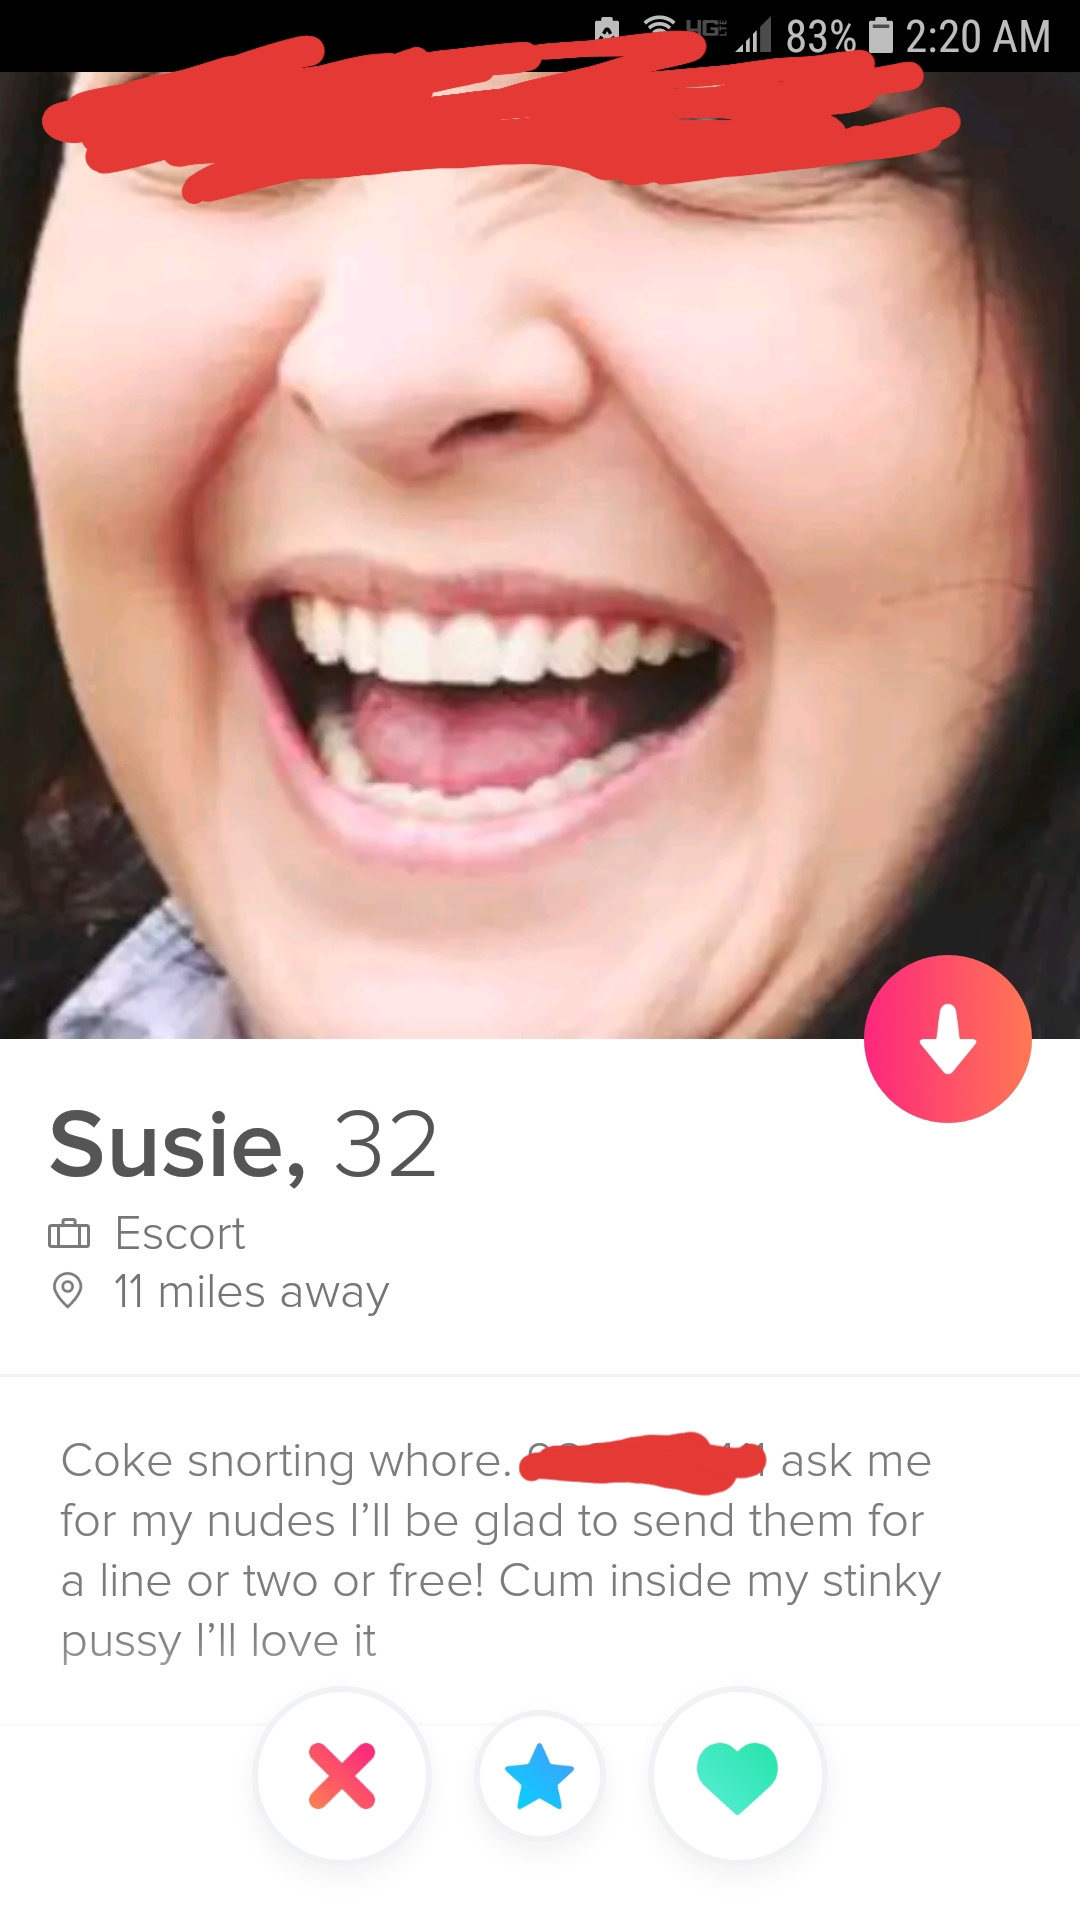 shameless tinder - Susie, 32 Coke snorting whore. ask me for my nudes I'll be glad to send them for a line or two or freel Cum inside my stinky pussy I'll love it